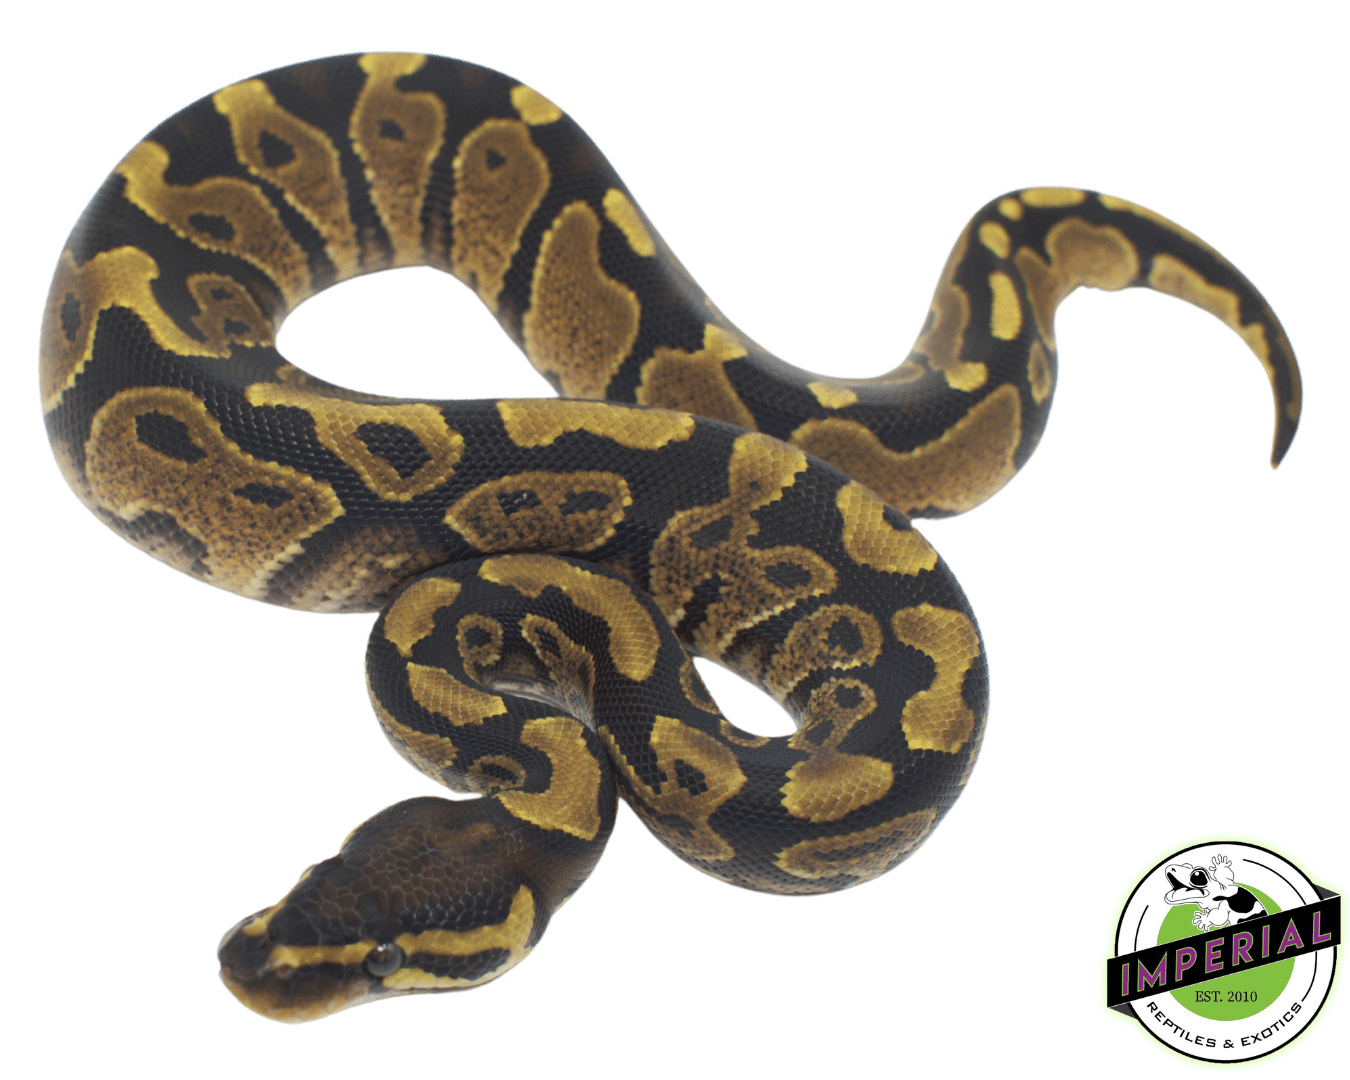 yellowbelly ball python for sale, buy ball pythons online at cheap prices